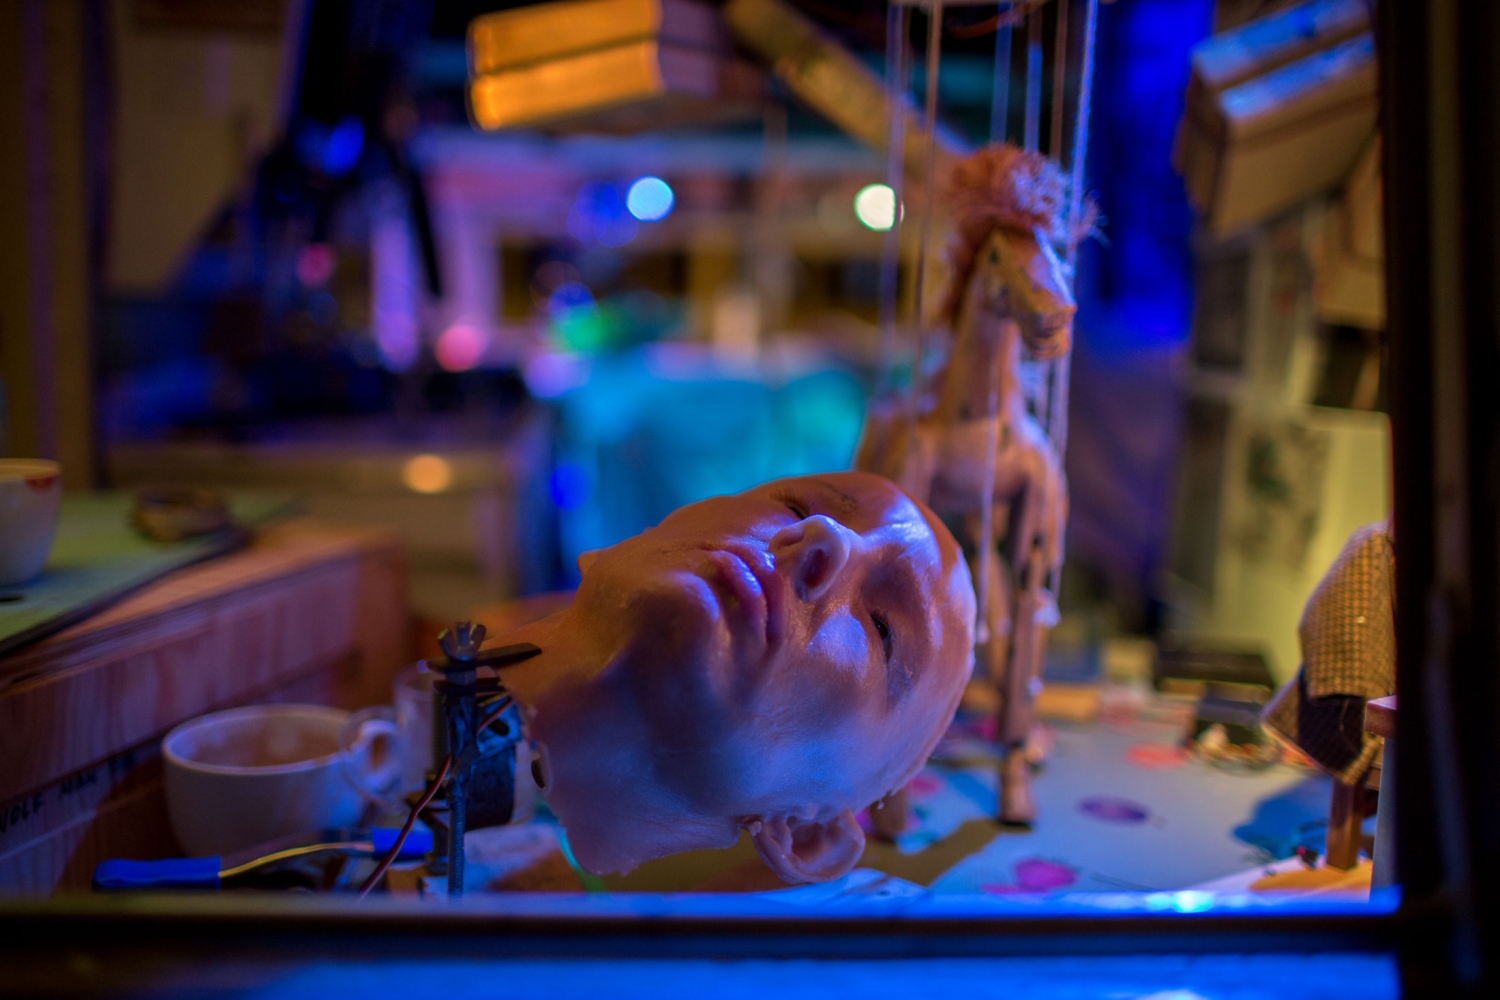 Janet Cardiff &amp;amp; George Bures Miller
The Marionette Maker,&amp;nbsp;2014
Detail
Mixed media installation including caravan, marionettes, robotics, audio, and lighting
​Duration: Approximately 14 minutes, looped
184 x&amp;nbsp;222 x&amp;nbsp;130 inches
(467.4 x 563.9 x 330.2 cm)